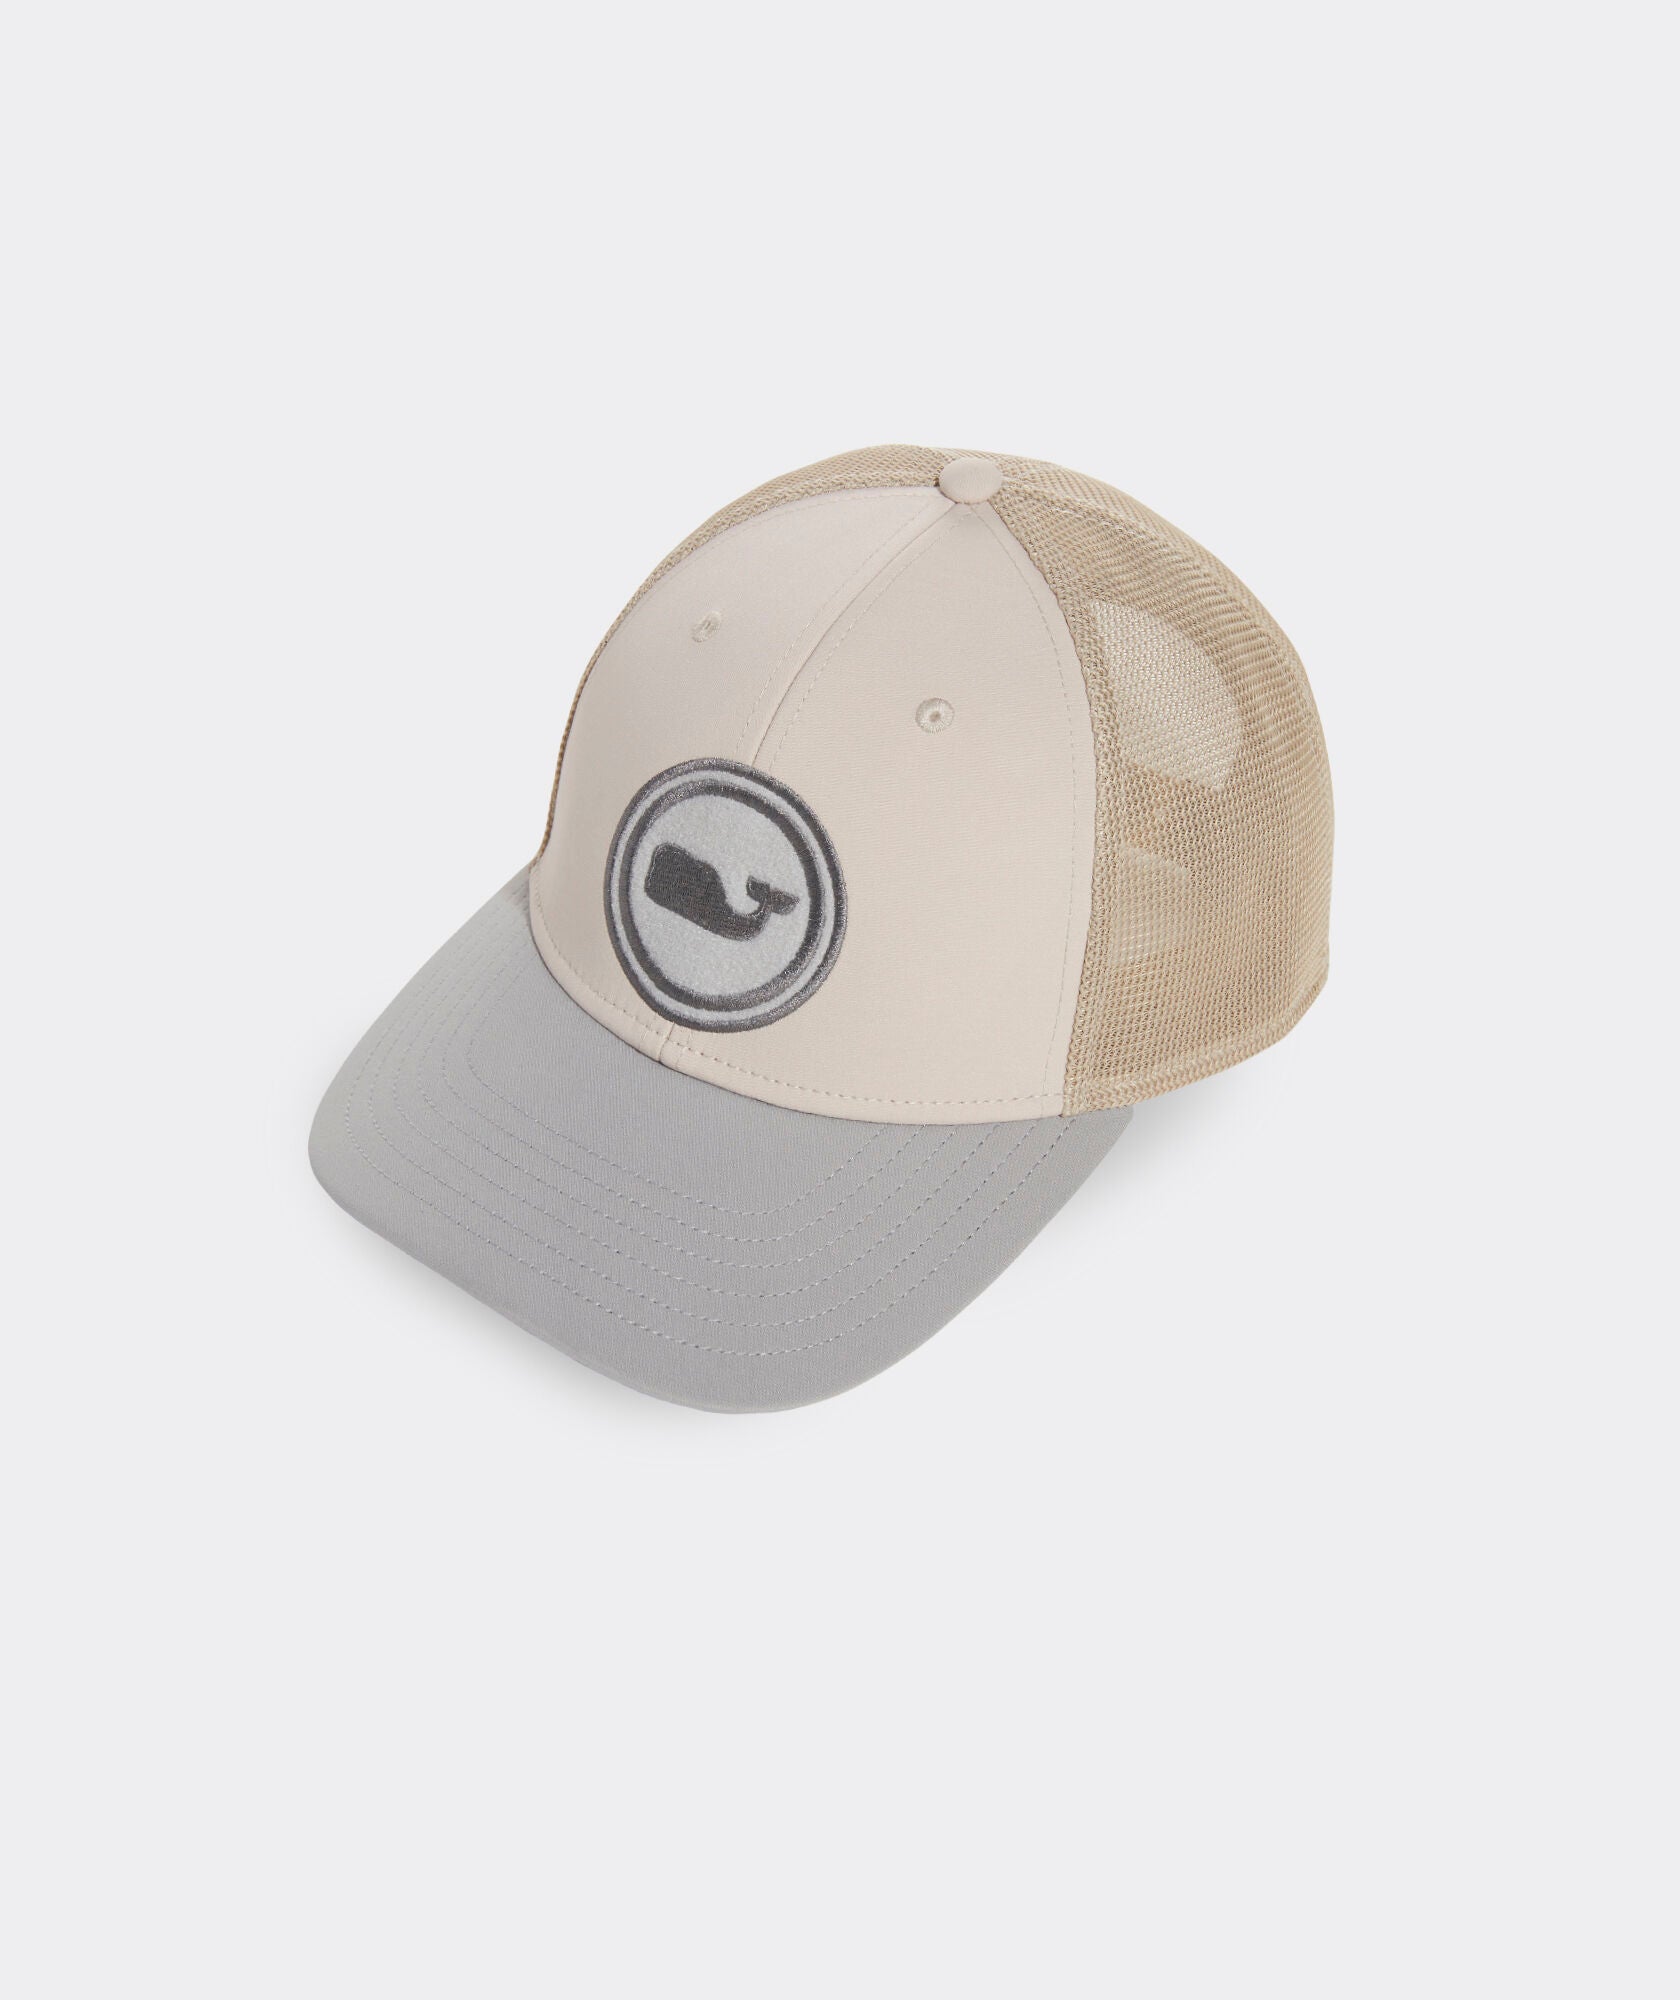 A Vineyard Vines Velcro Whale Dot Patch Perf Trucker in the color tan.